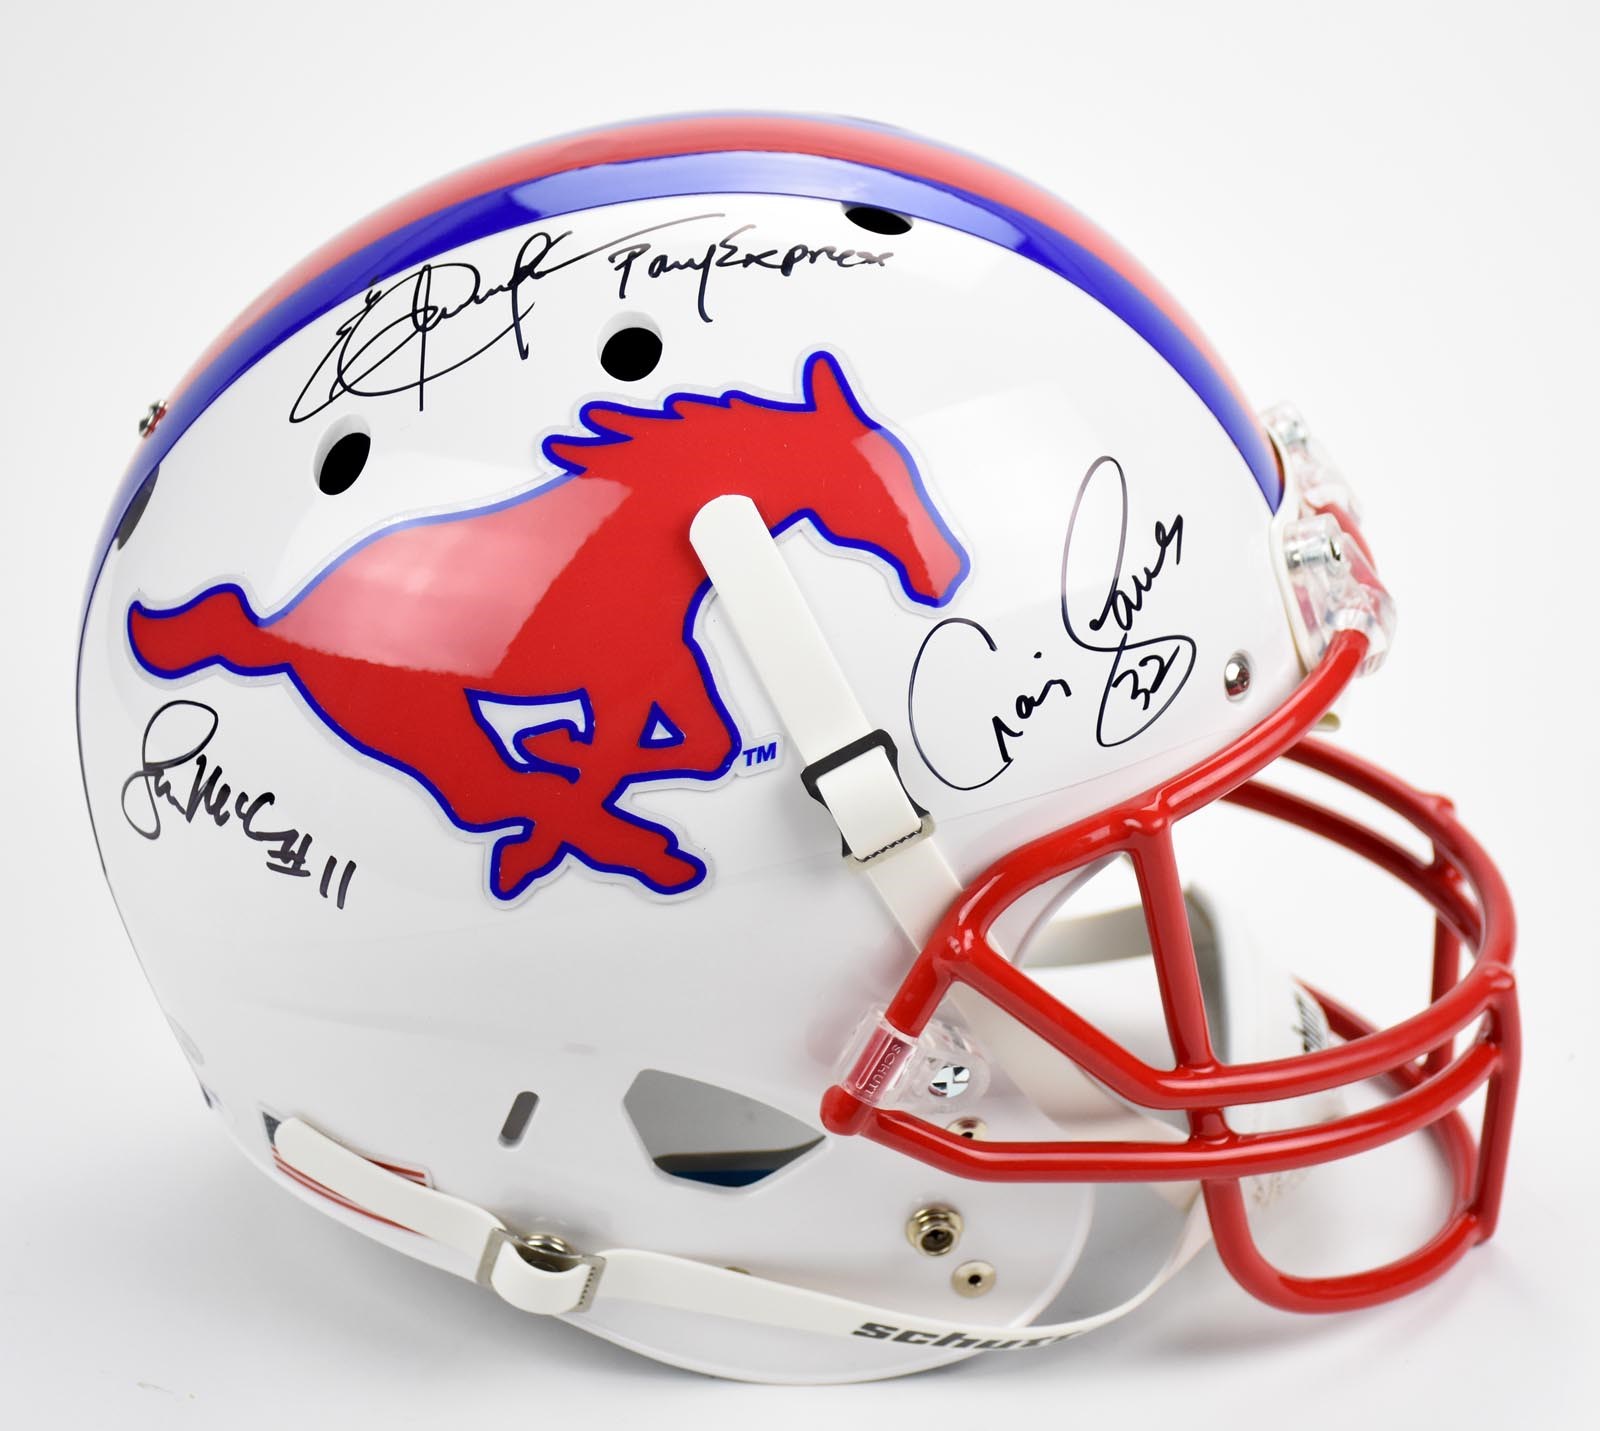 Autographs Football - Eric Dickerson Signed SMU Helmet With Others PSA/DNA